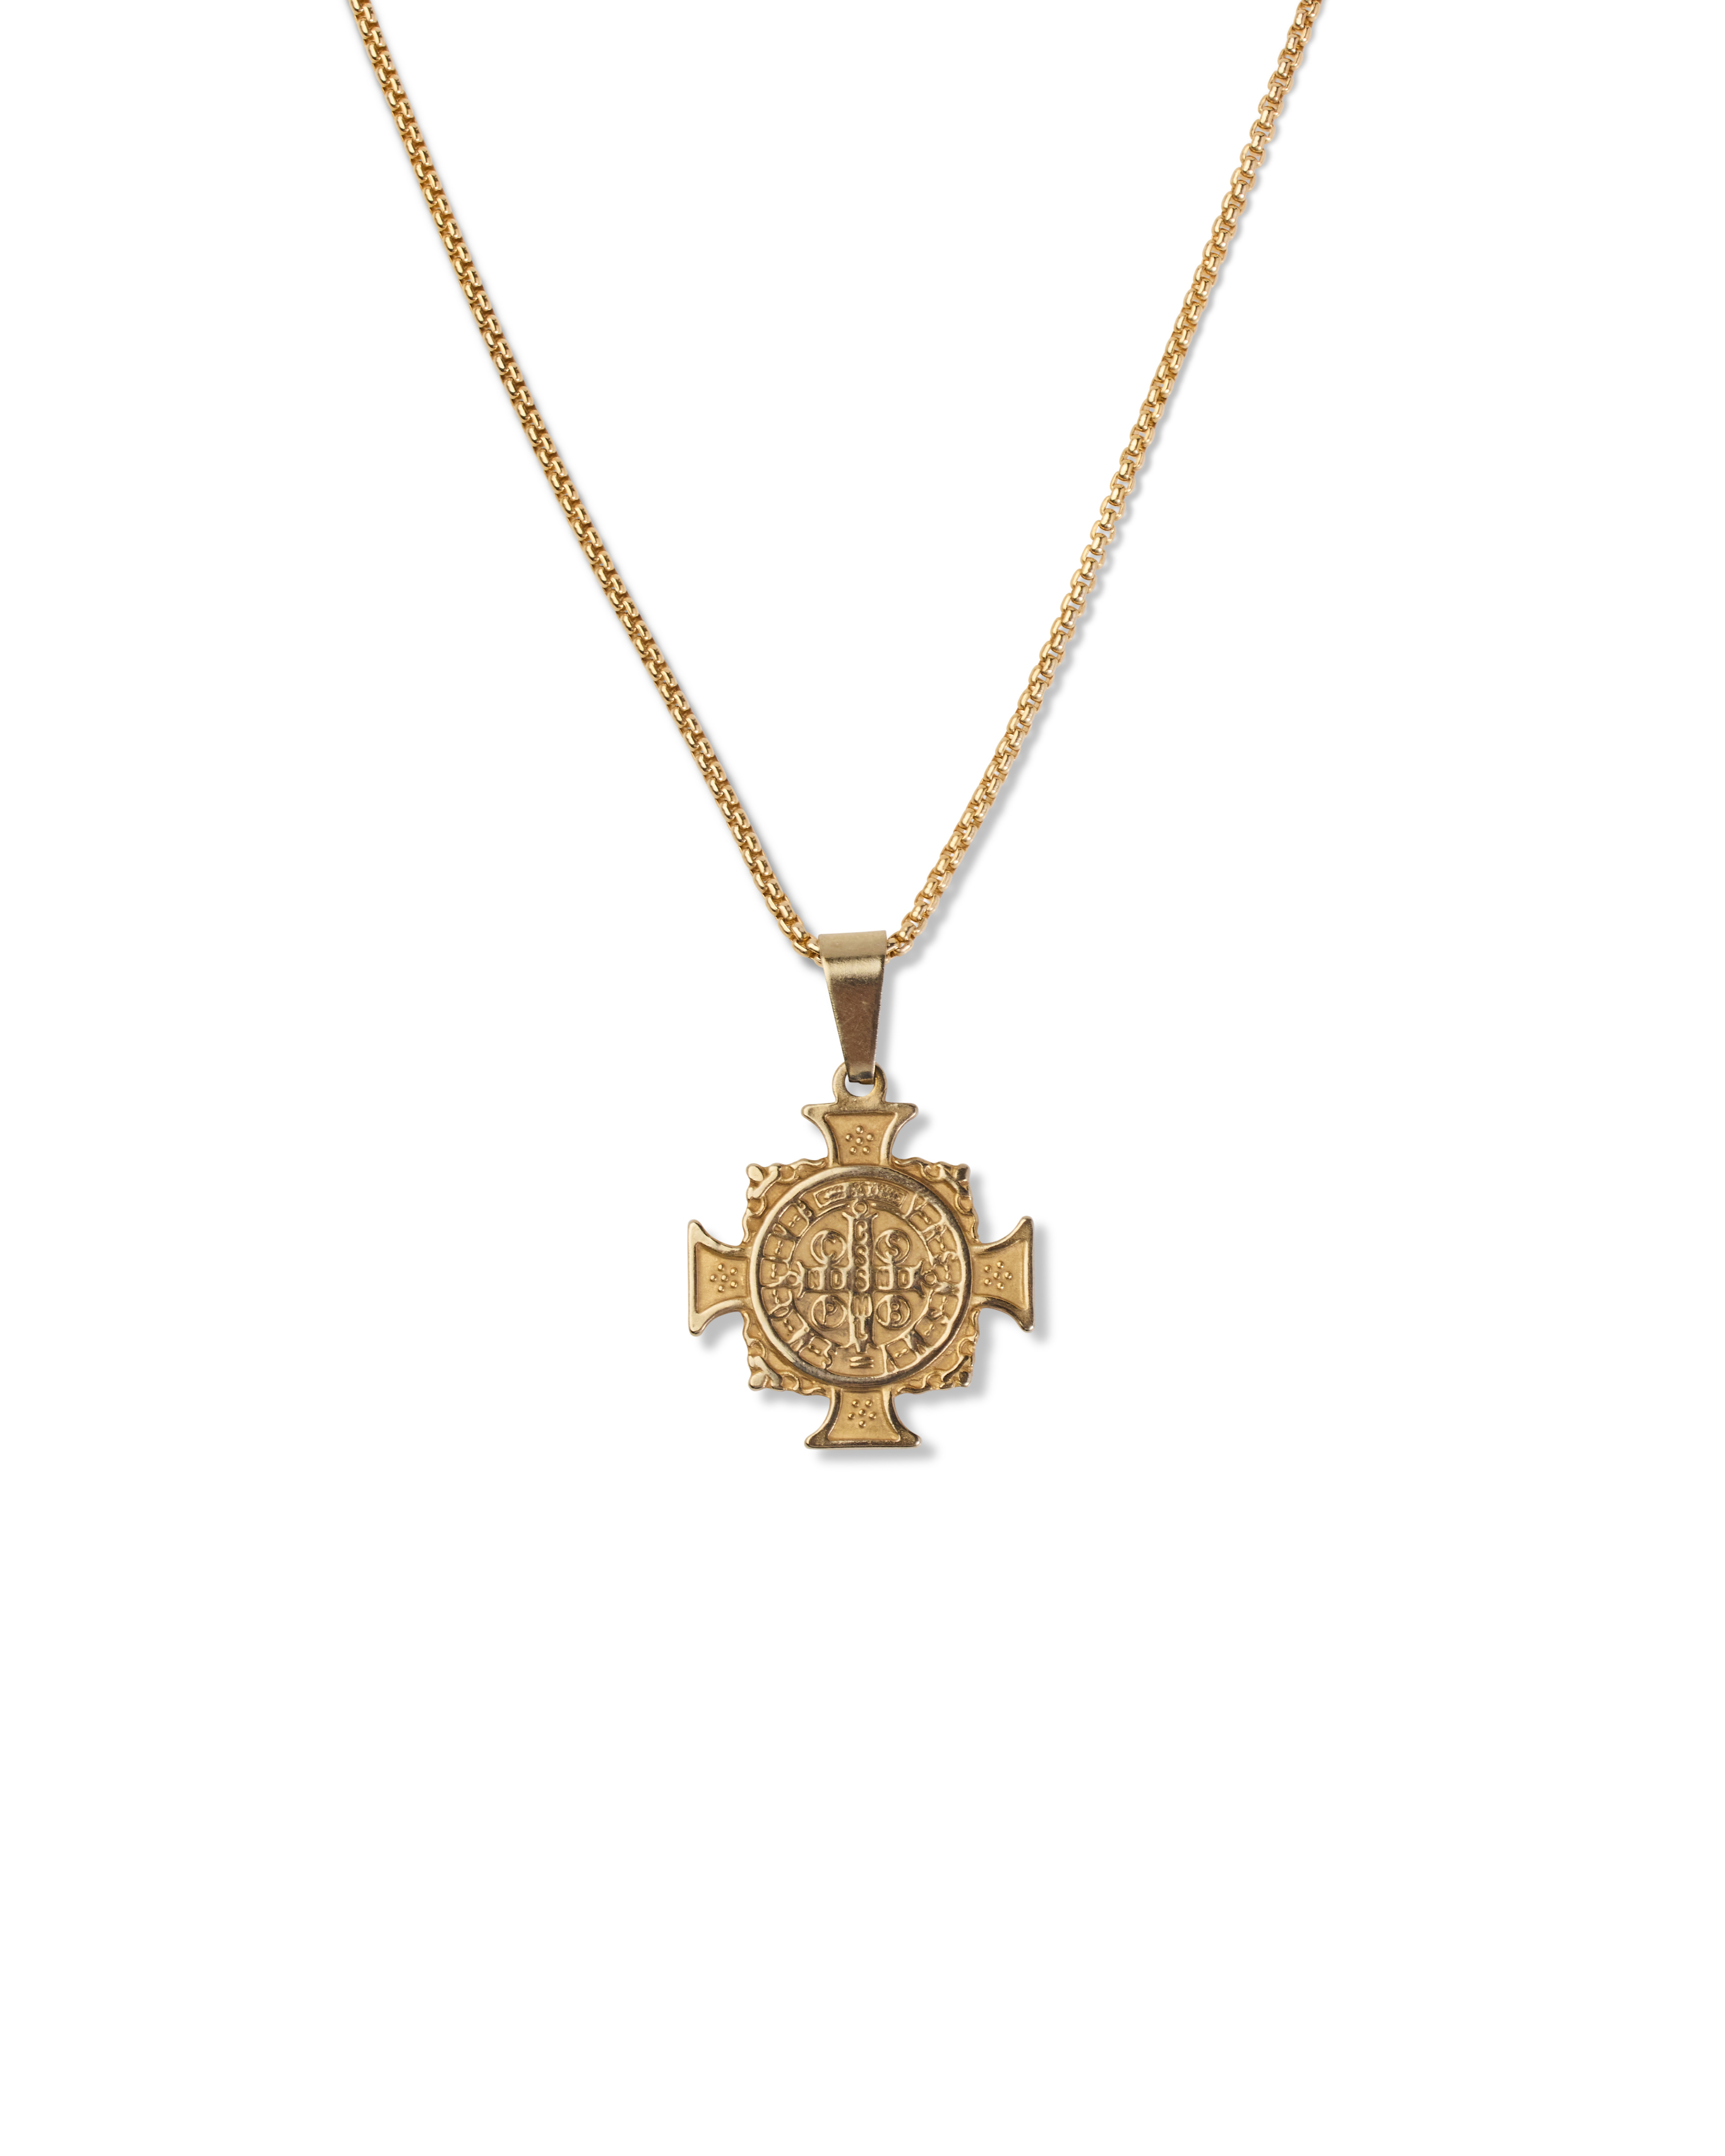 The St Benedict Necklace